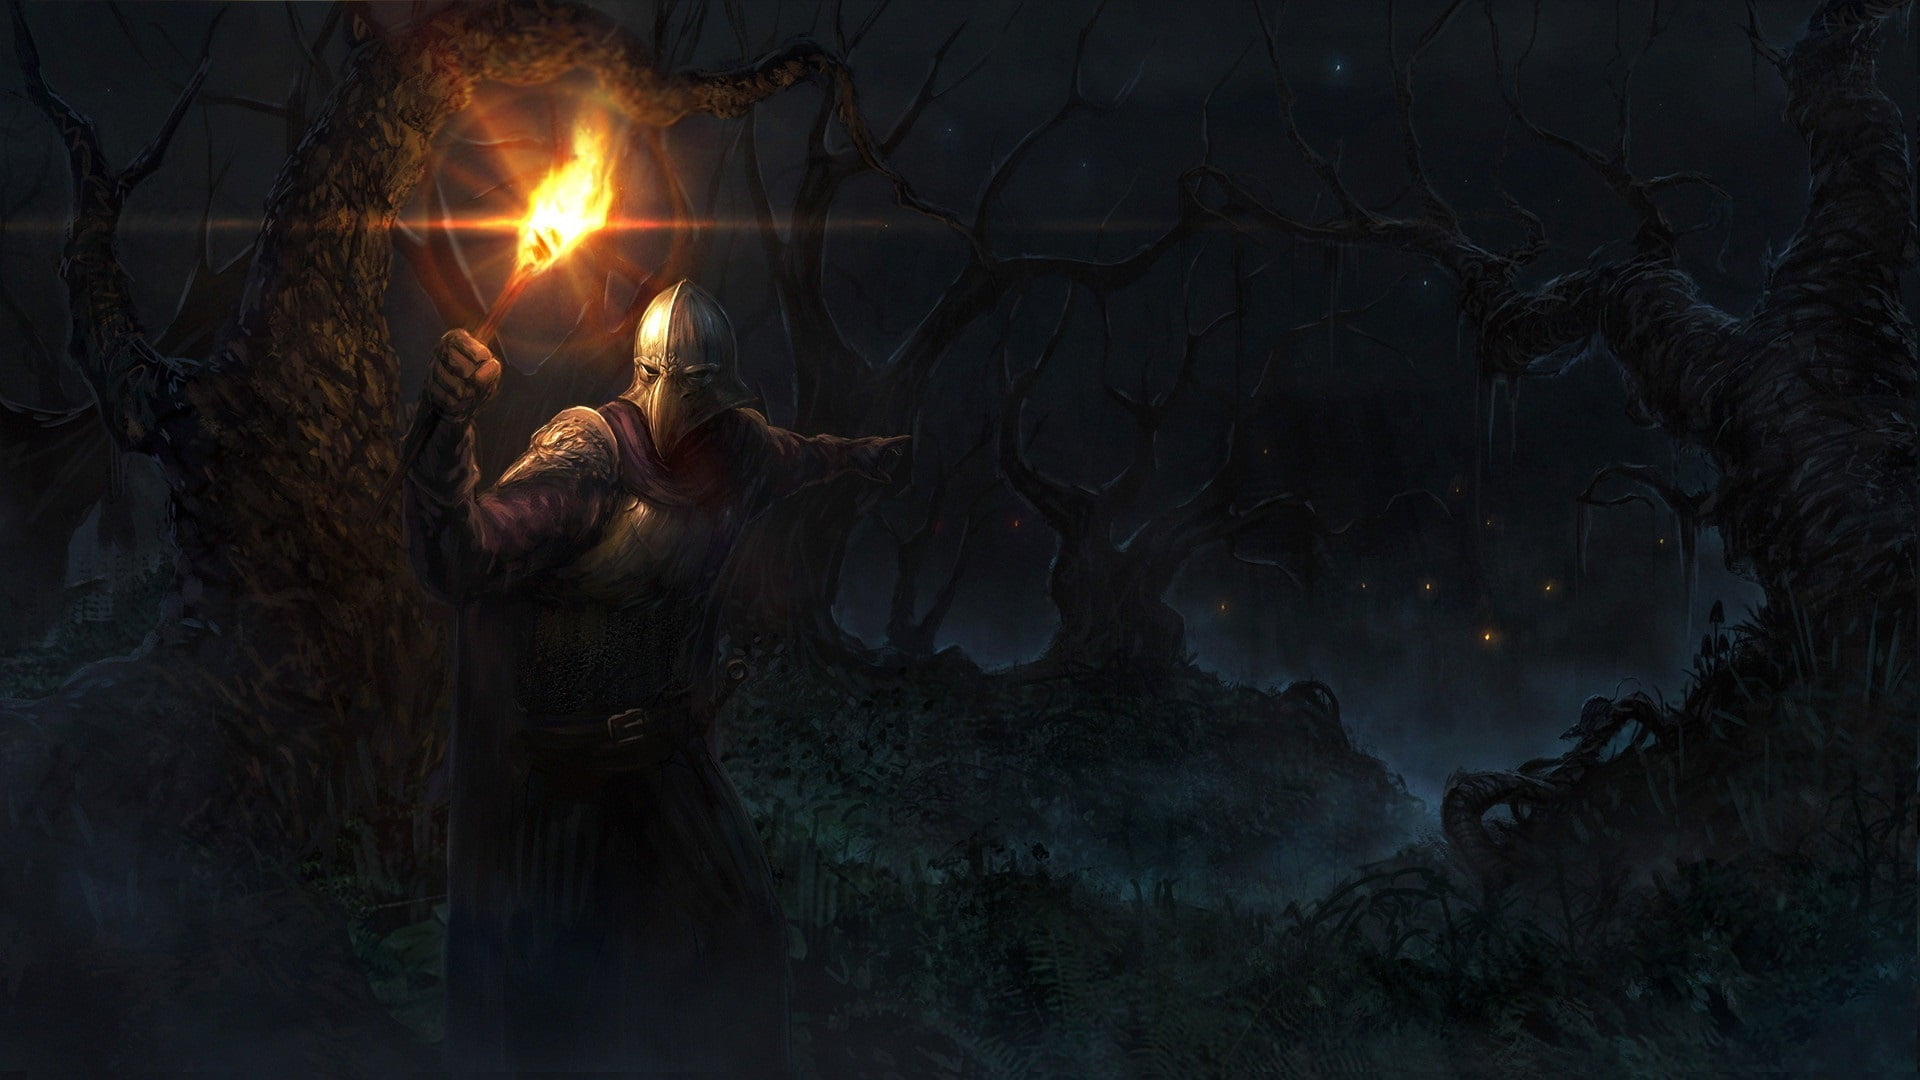 forest, trees, night, fire, people, armor, mask, fantasy, torch